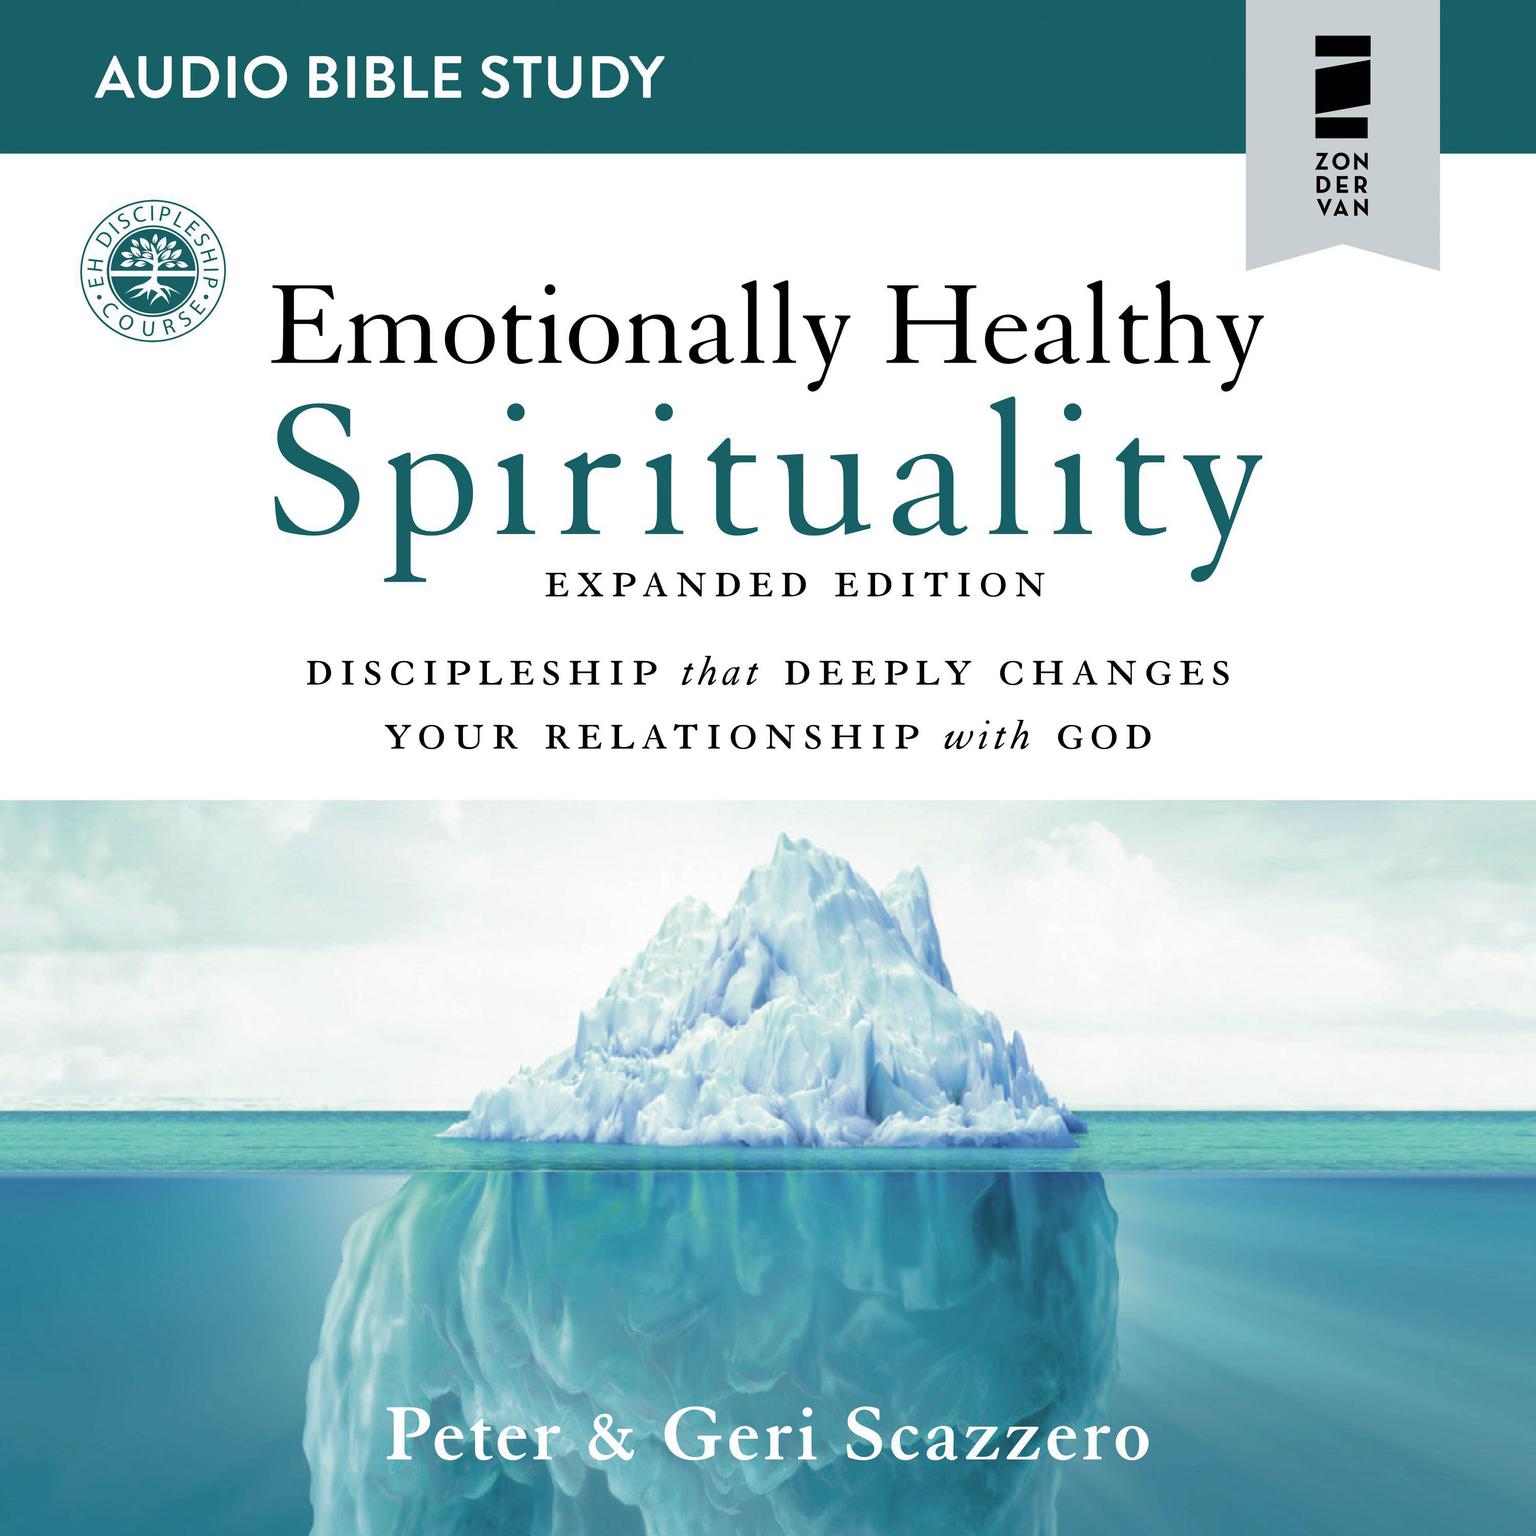 Emotionally Healthy Spirituality Expanded Edition: Audio Bible Studies: Discipleship that Deeply Changes Your Relationship with God Audiobook, by Peter Scazzero